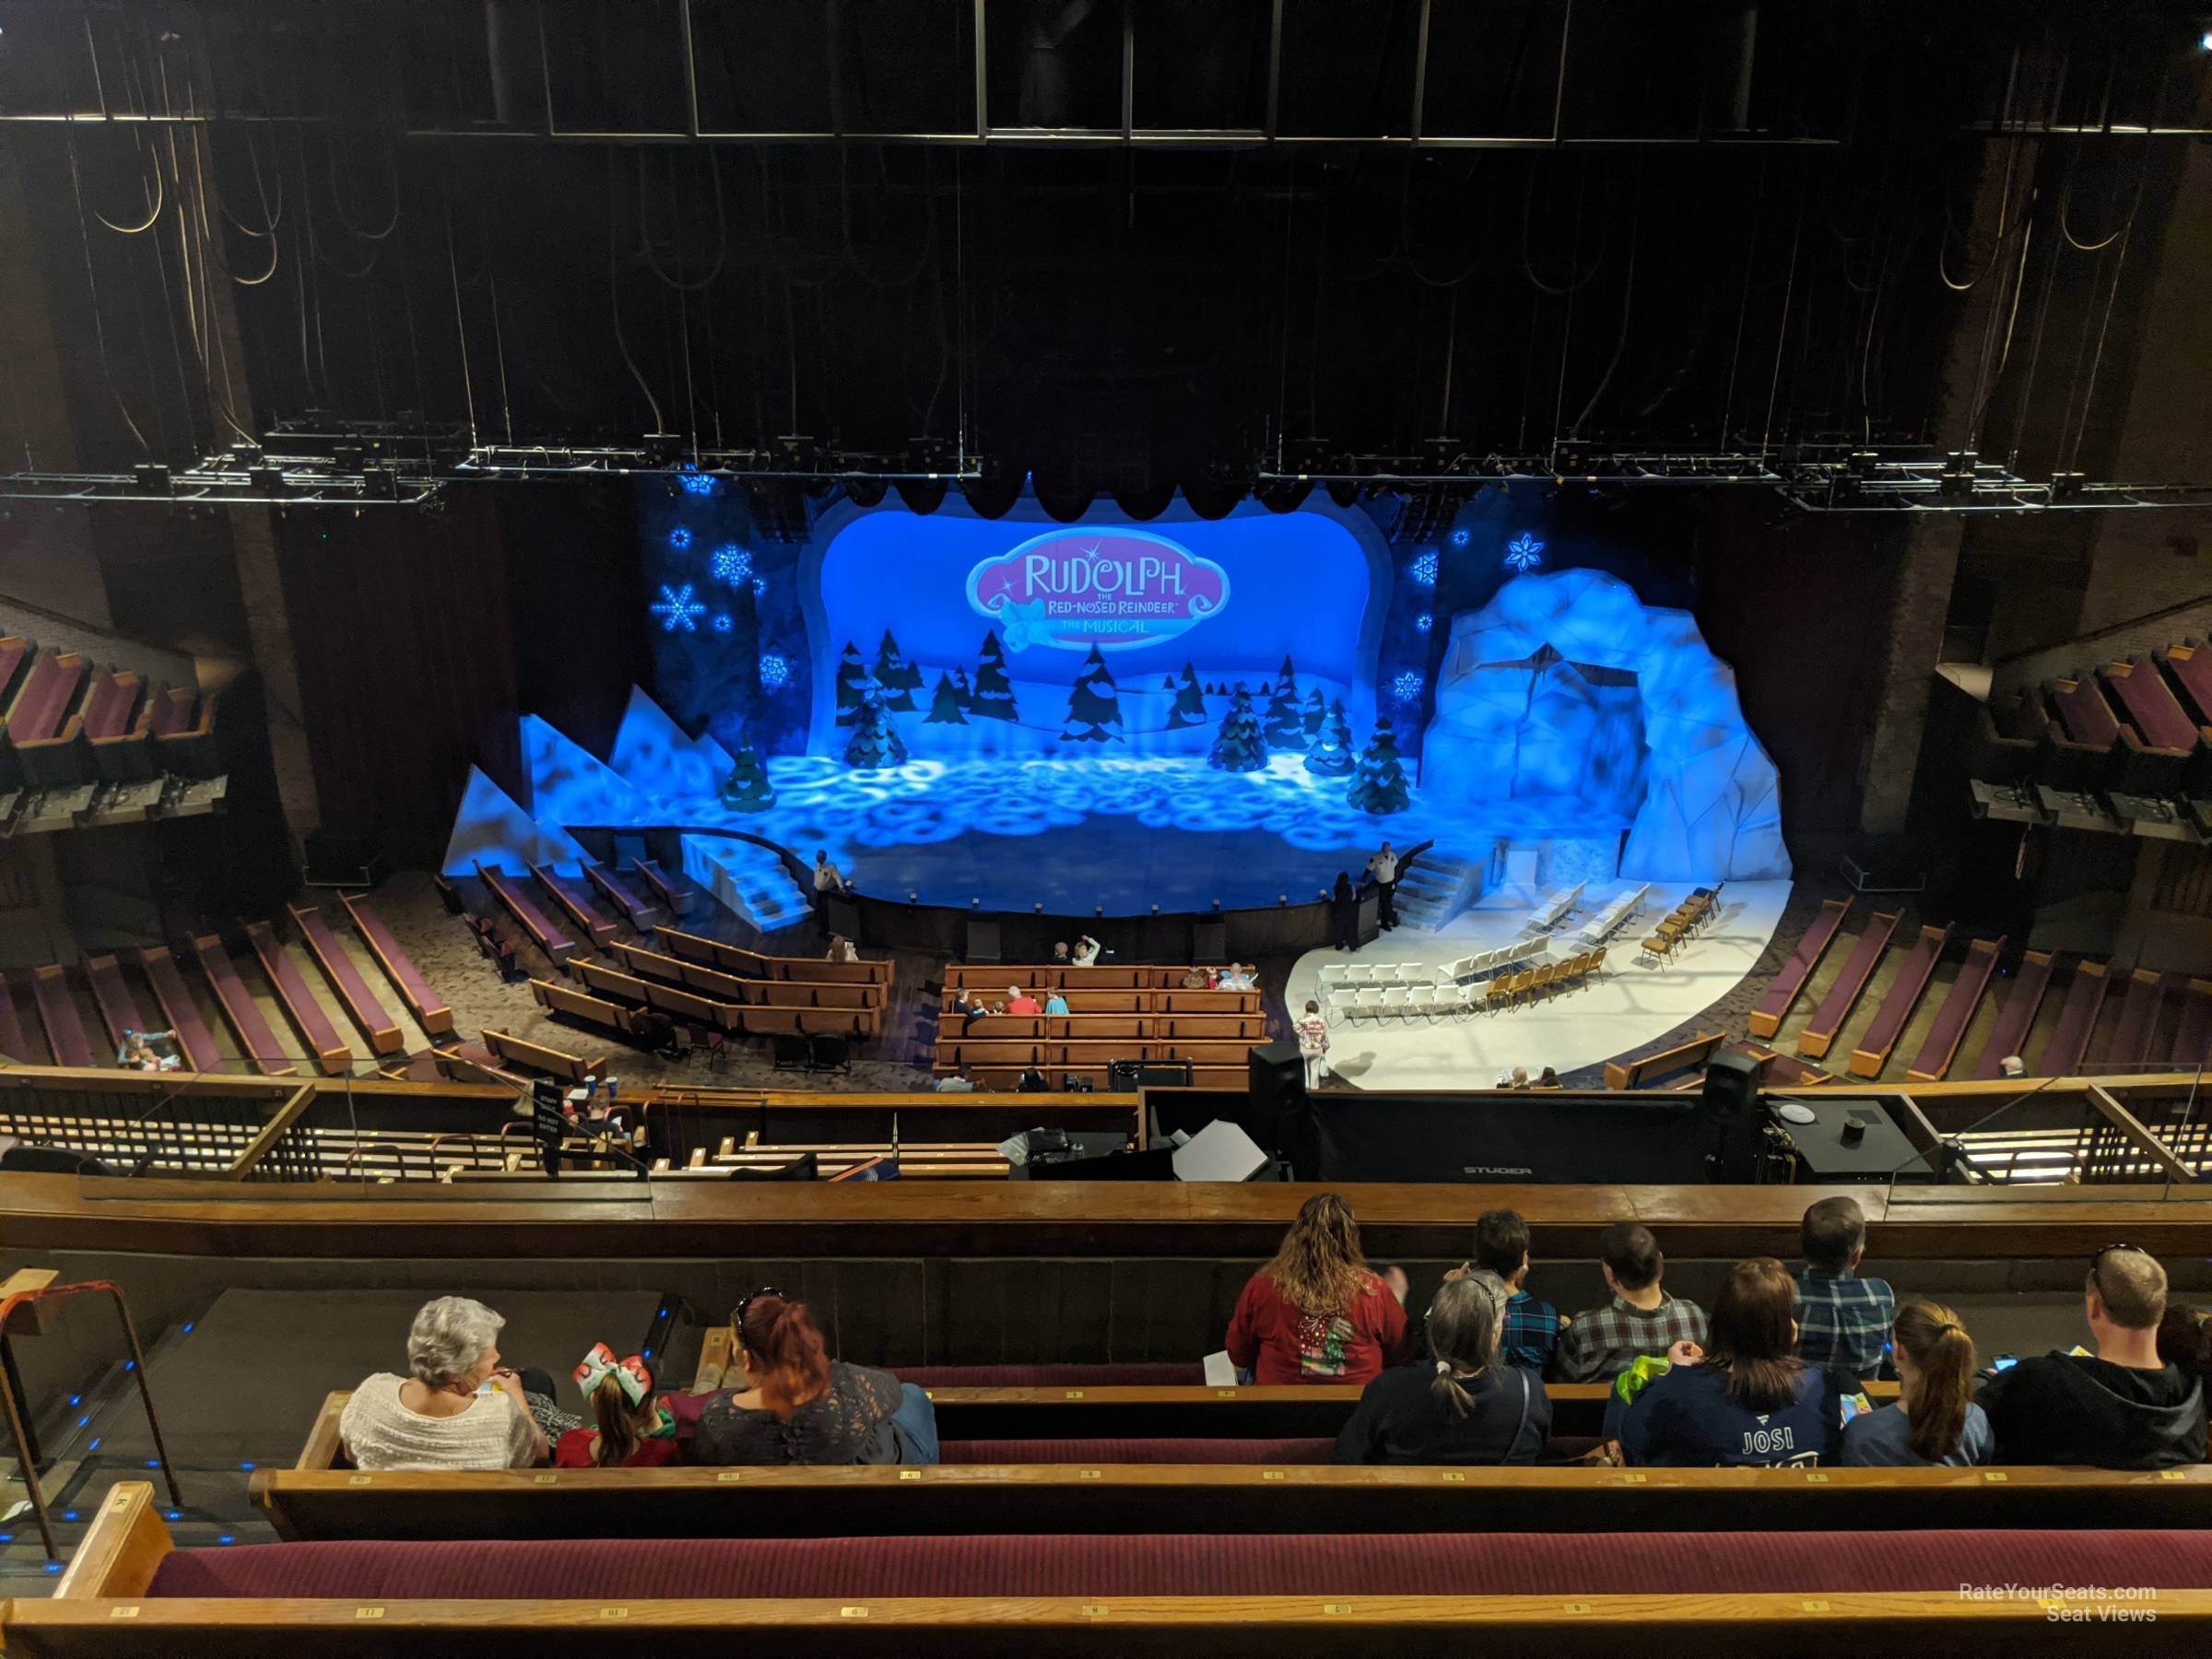 section 31, row p seat view  - grand ole opry house